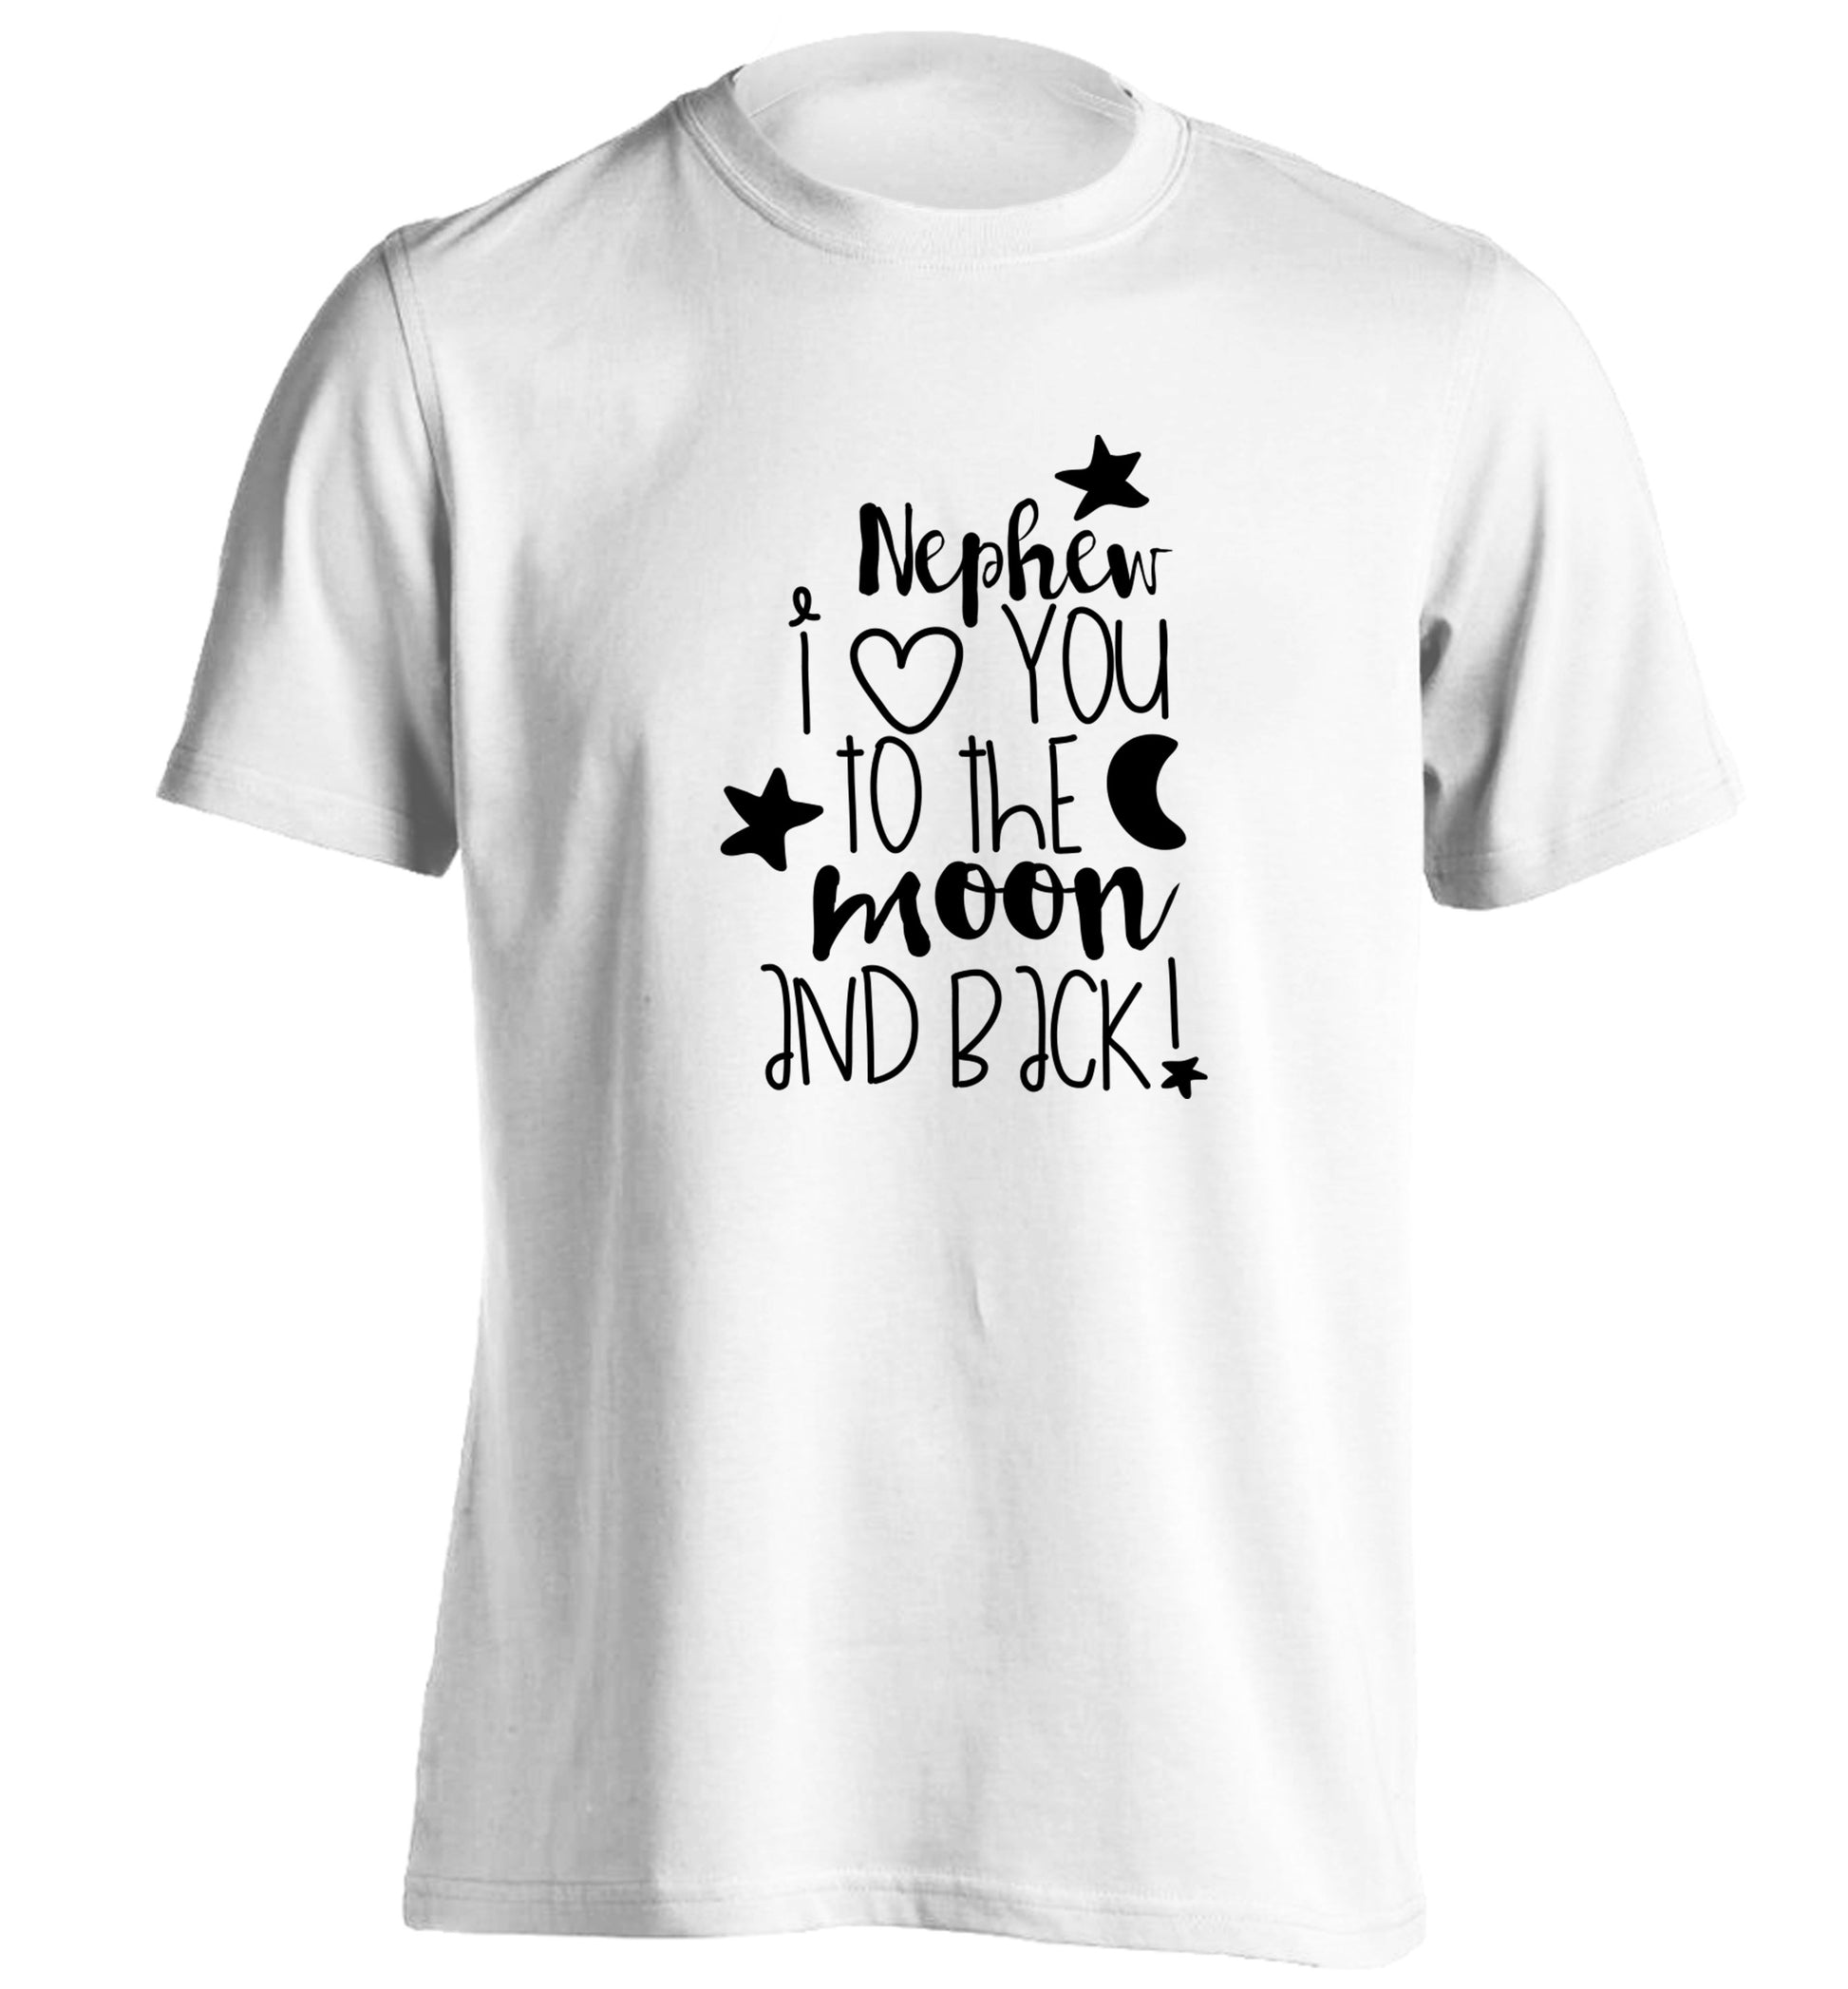 Nephew I love you to the moon and back adults unisex white Tshirt 2XL